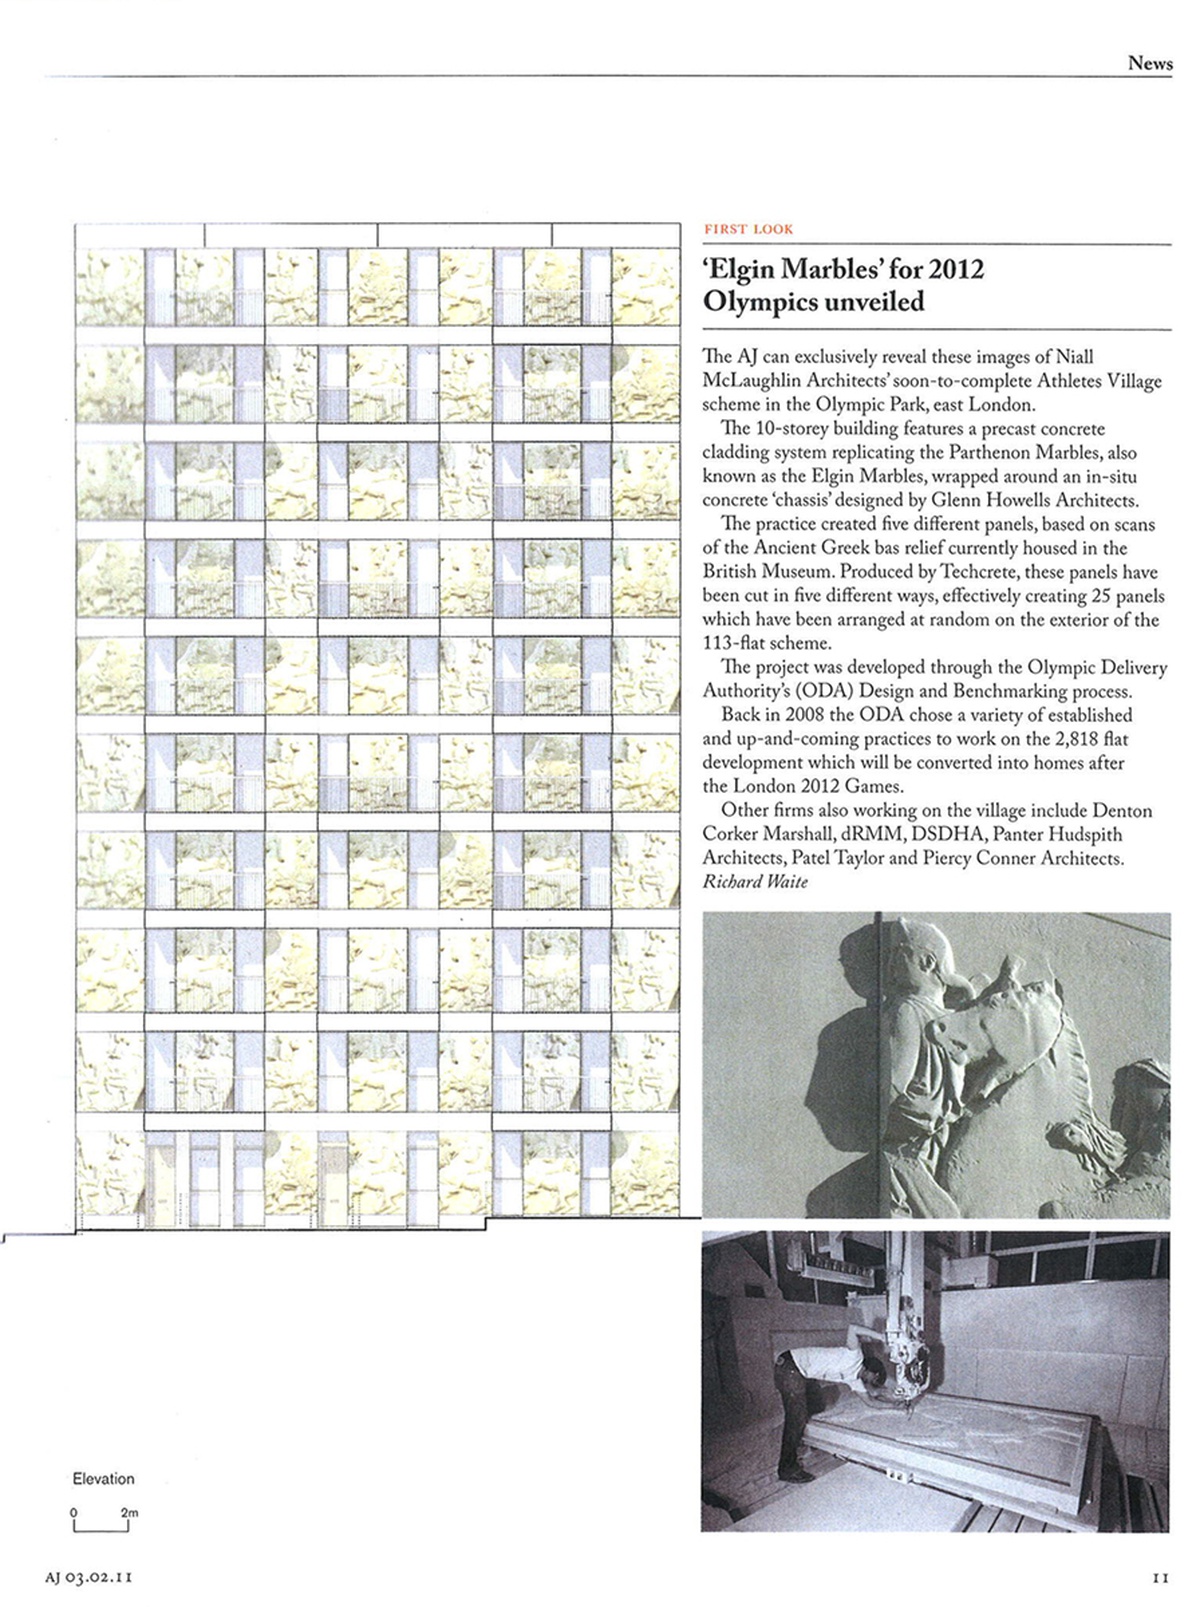 First Look, ‘Elgin Marbles’ for 2012 Olympics Unveiled - Architects’ Journal